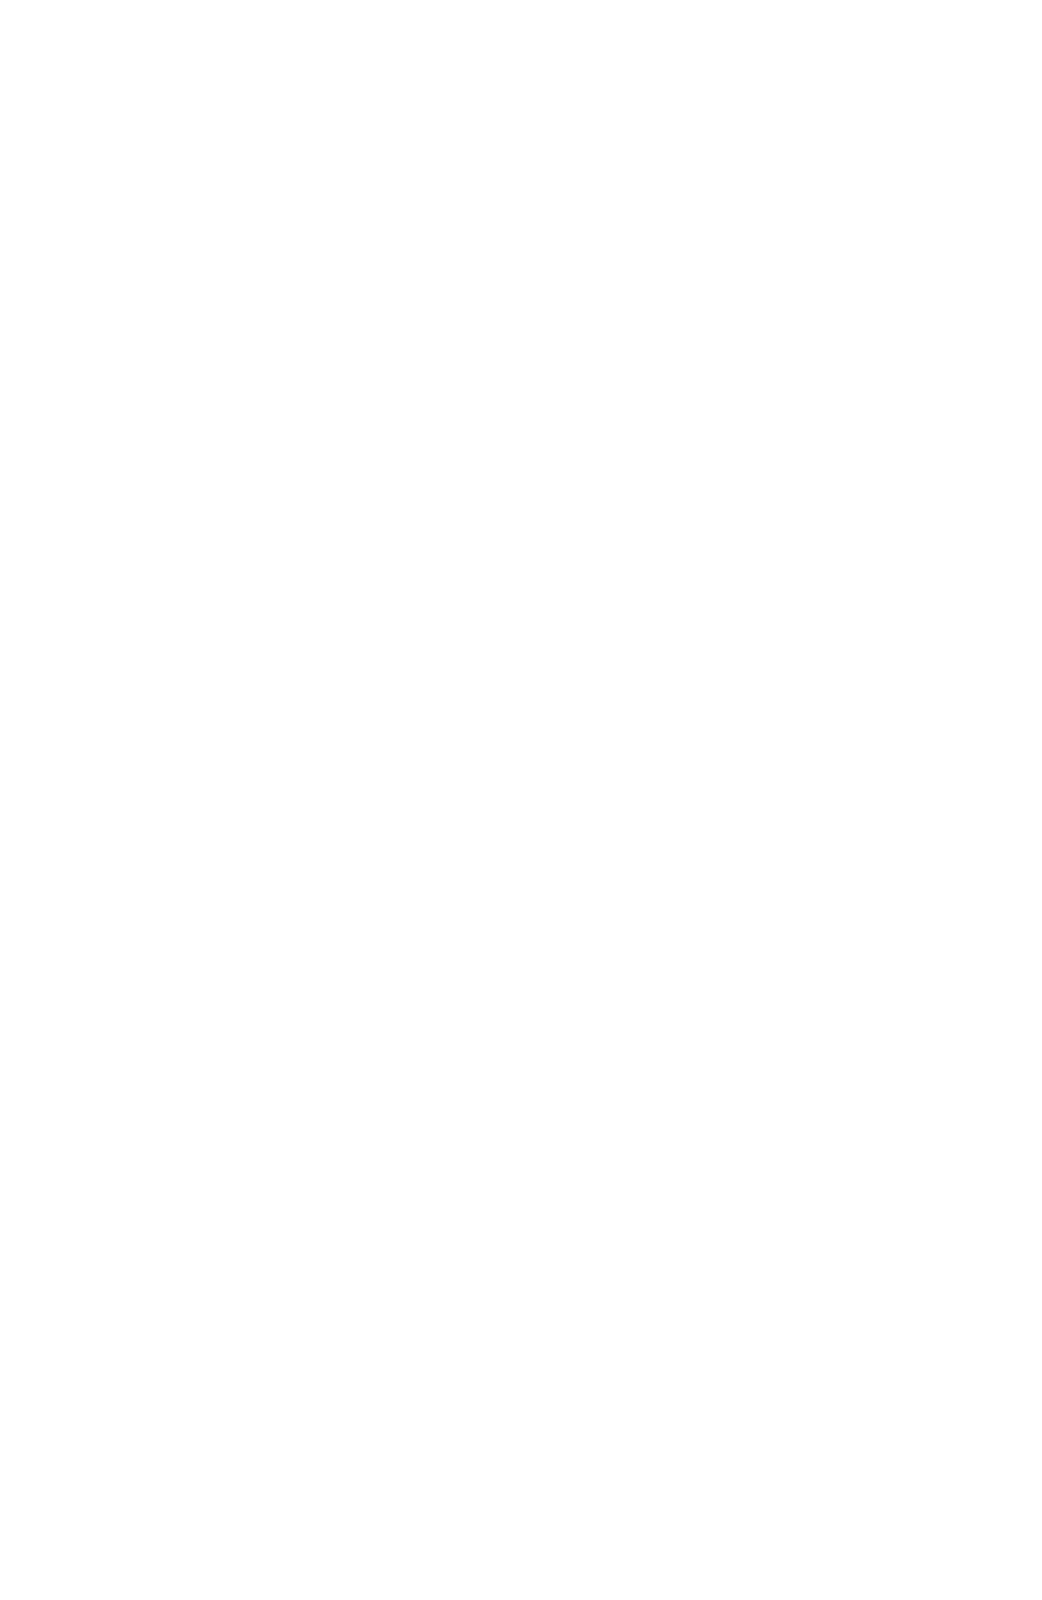 download click on picture to enlarge liverpool fc png image with no background pngkey com liverpool fc png image with no